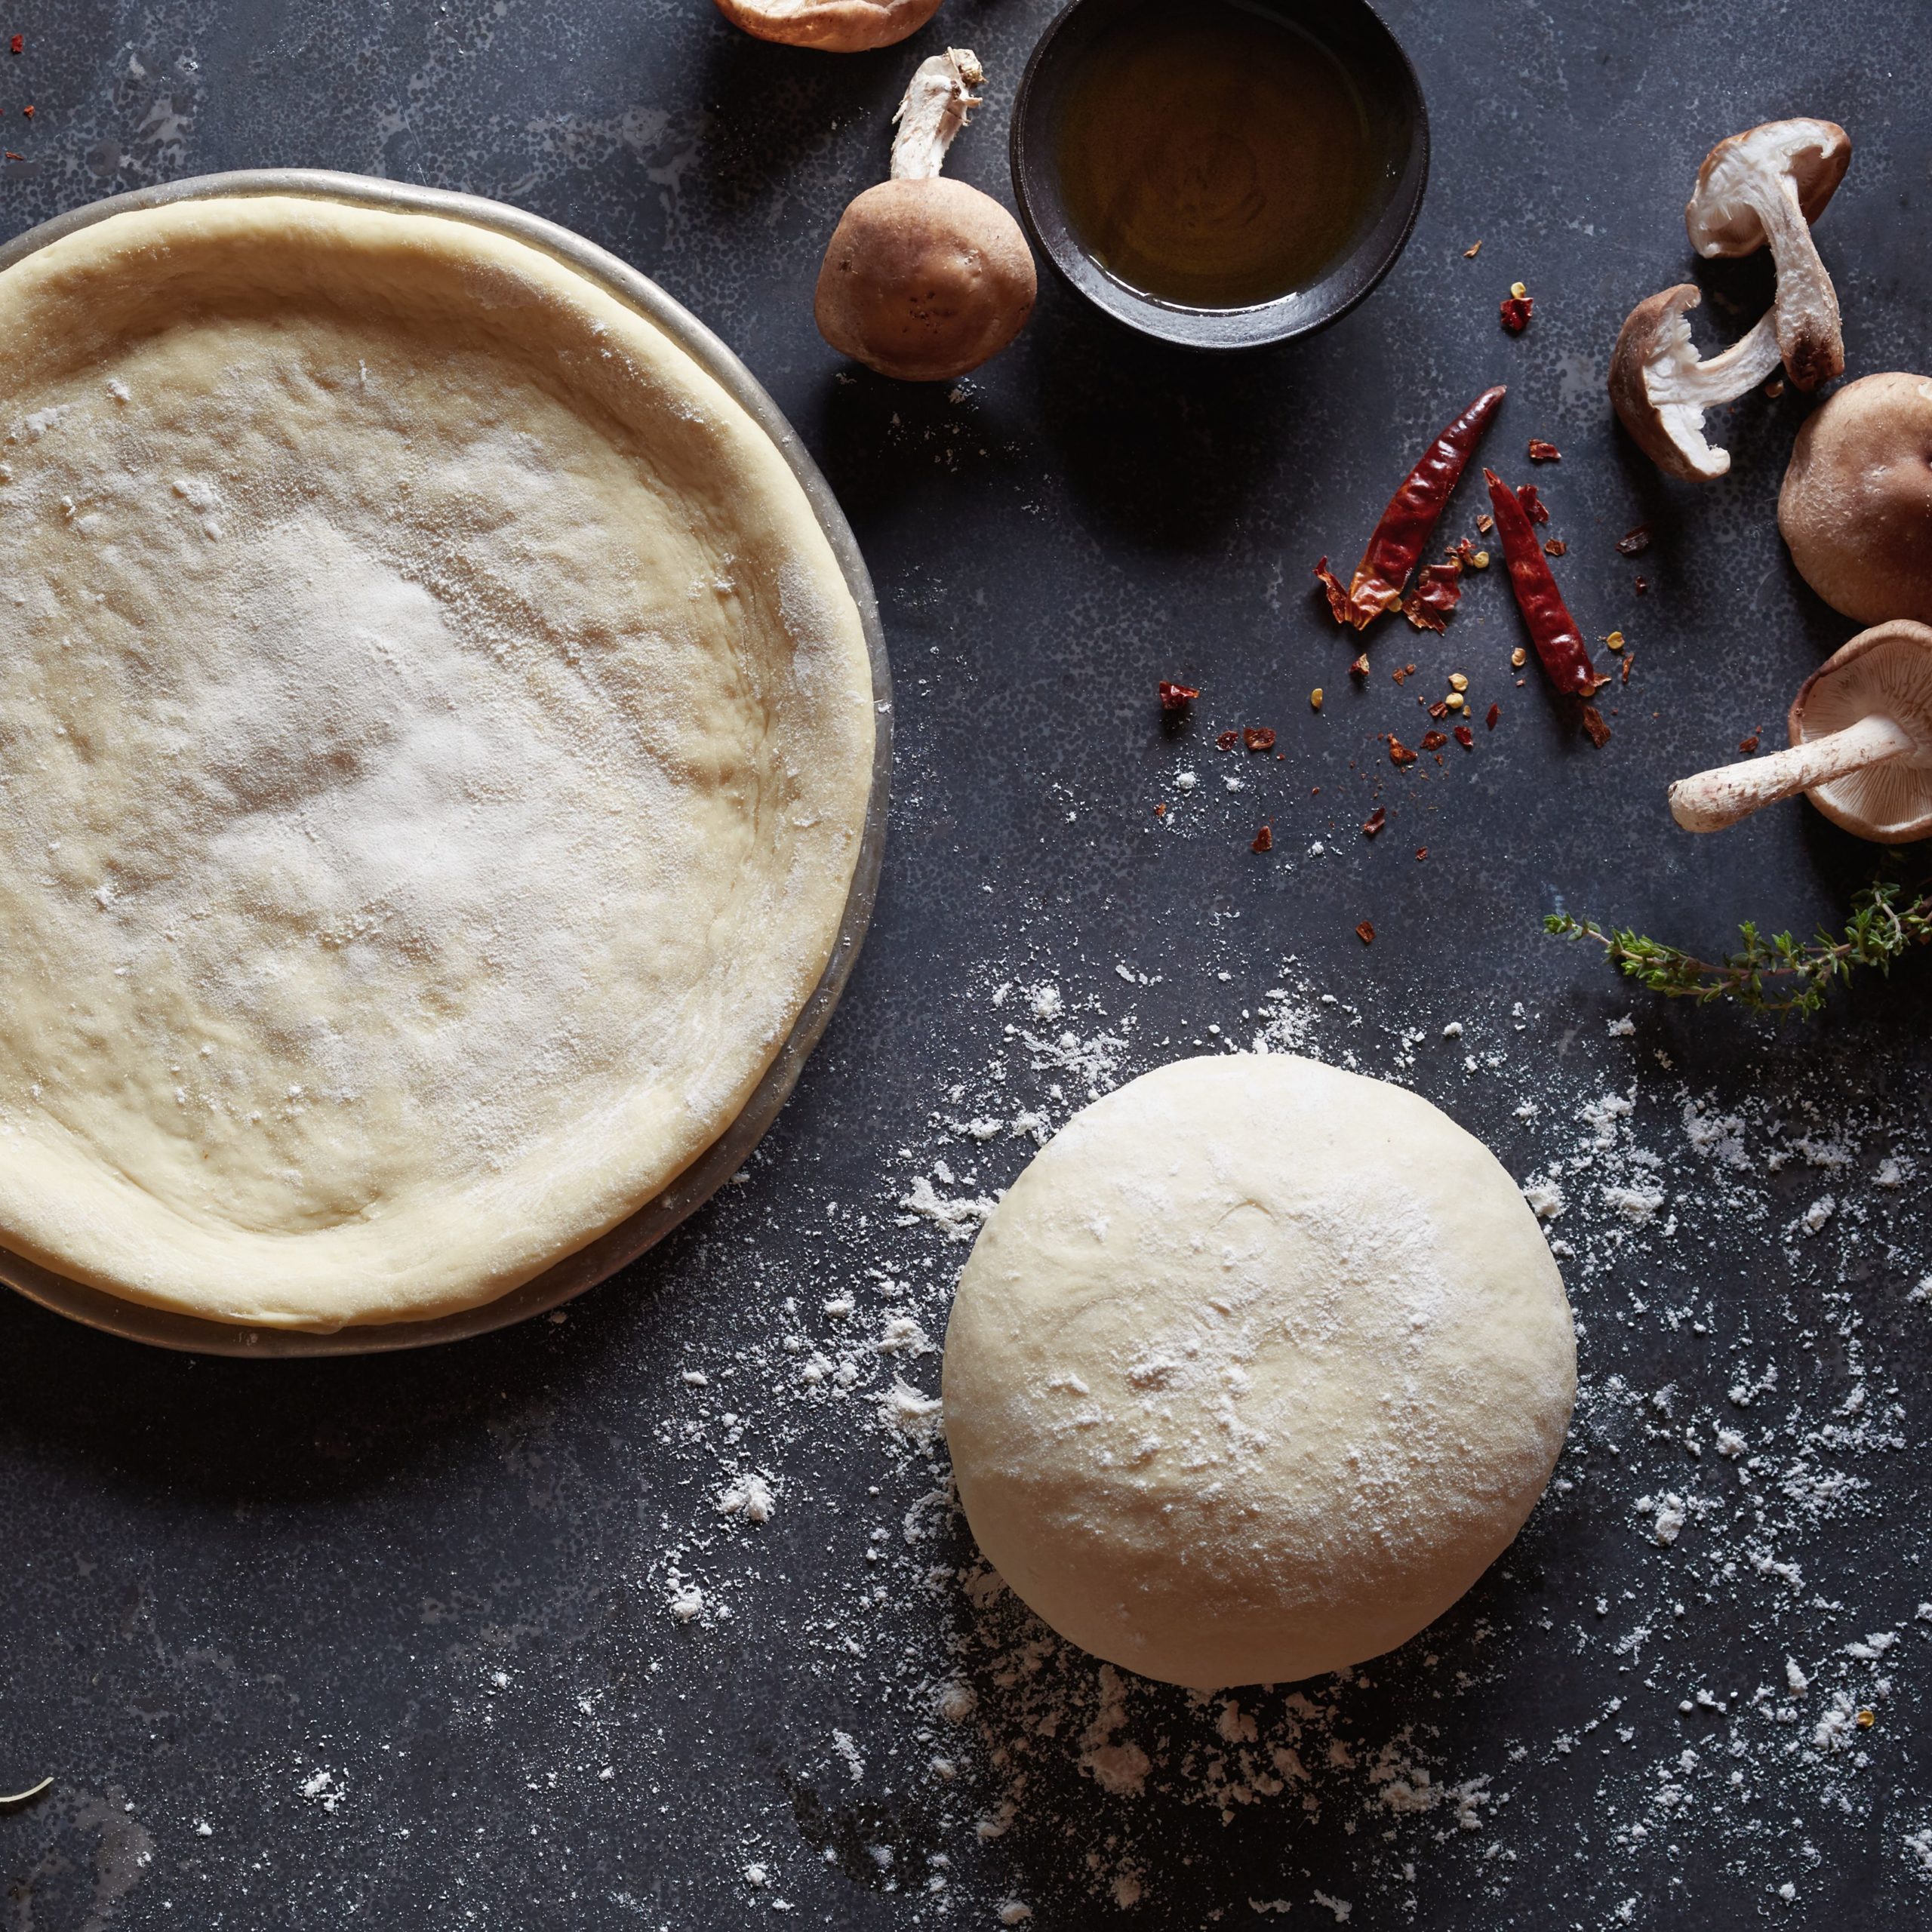 Soft dough ready to be topped with your favorite ingredients